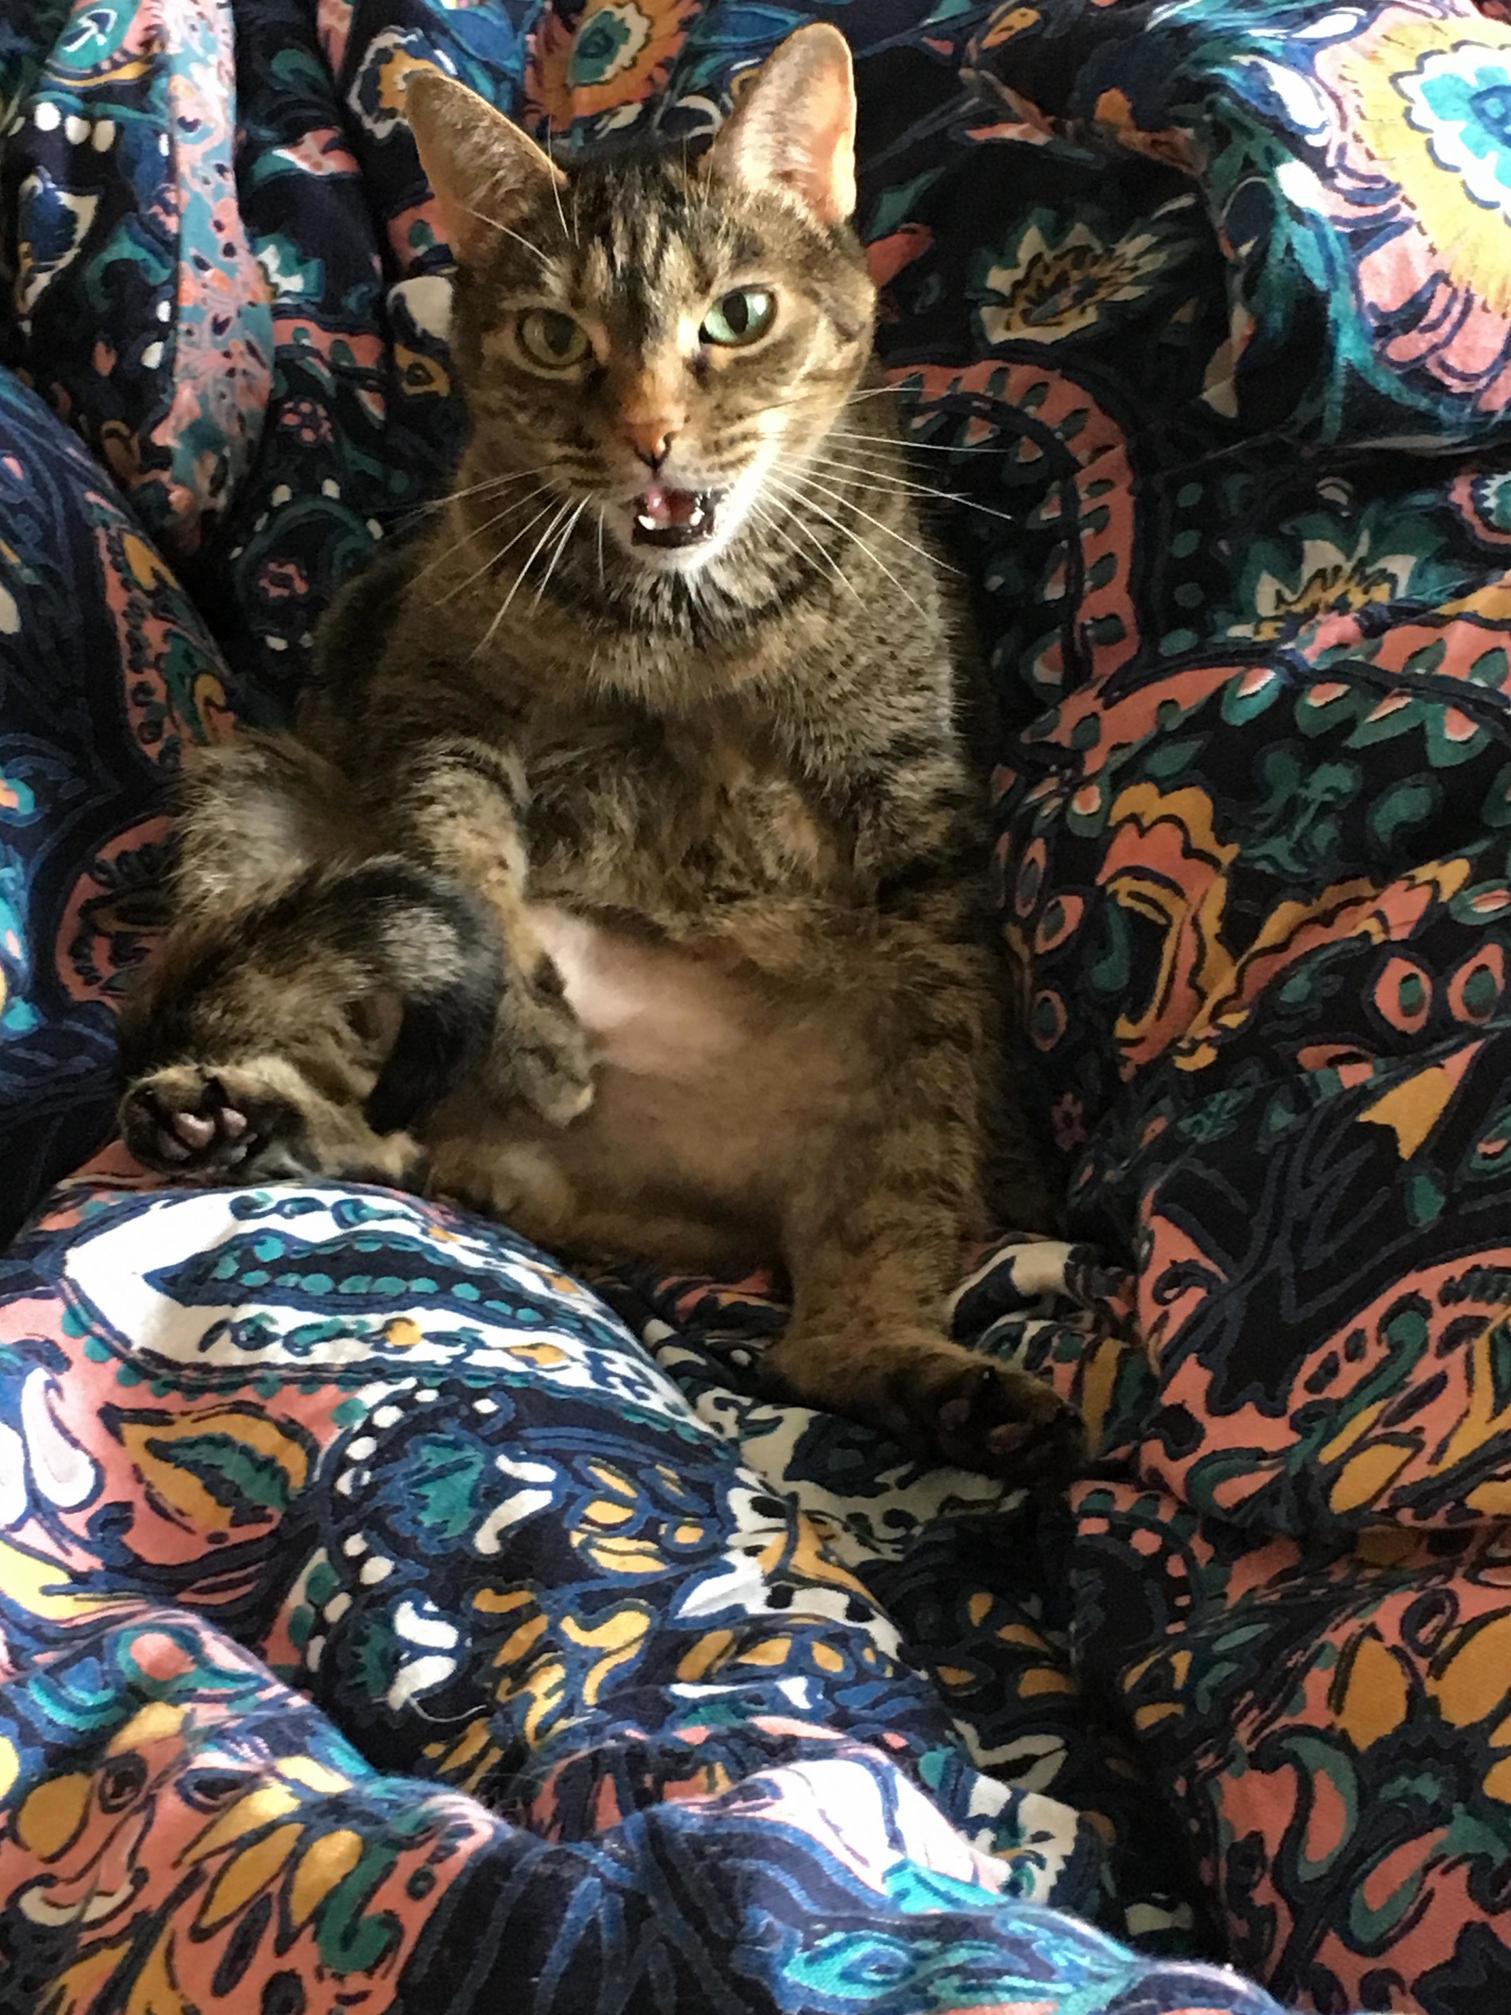 My weird cat olive. in all of her goofy glory.